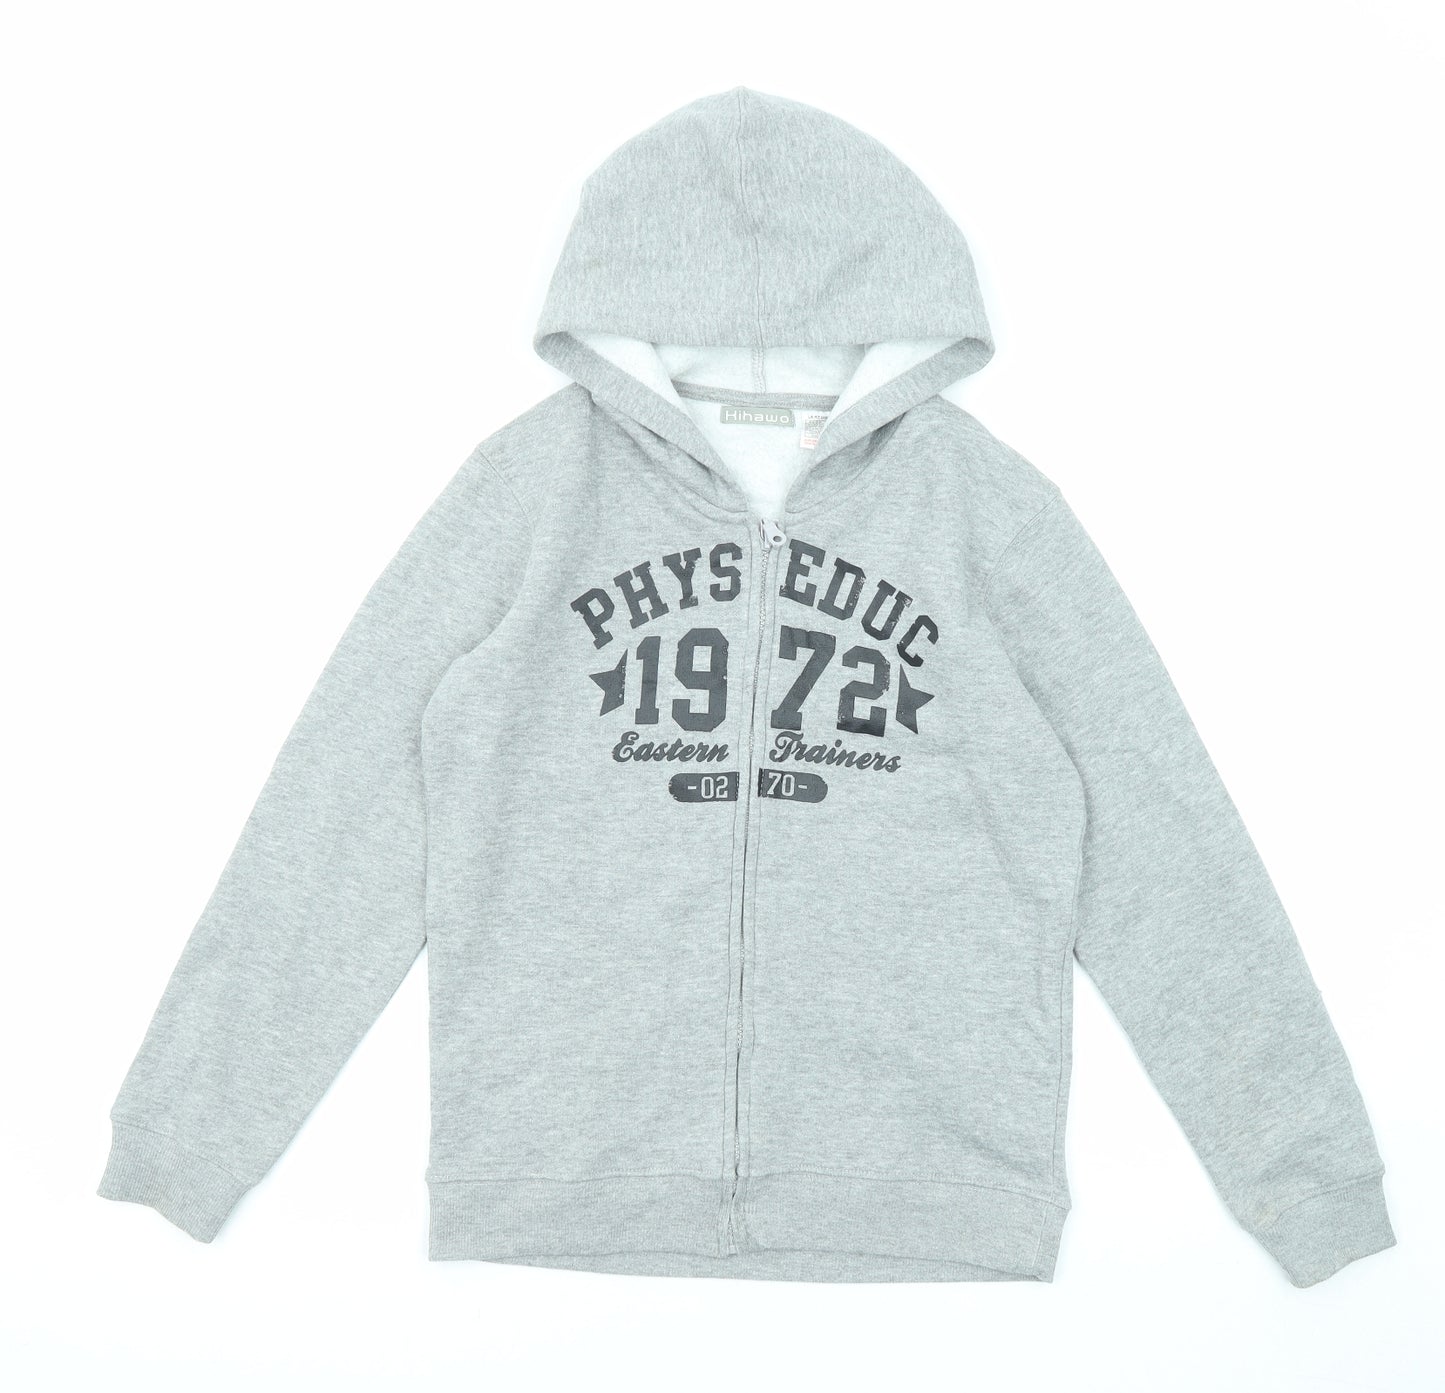 La Redoute Boys Grey Cotton Full Zip Hoodie Size 12 Years Pullover